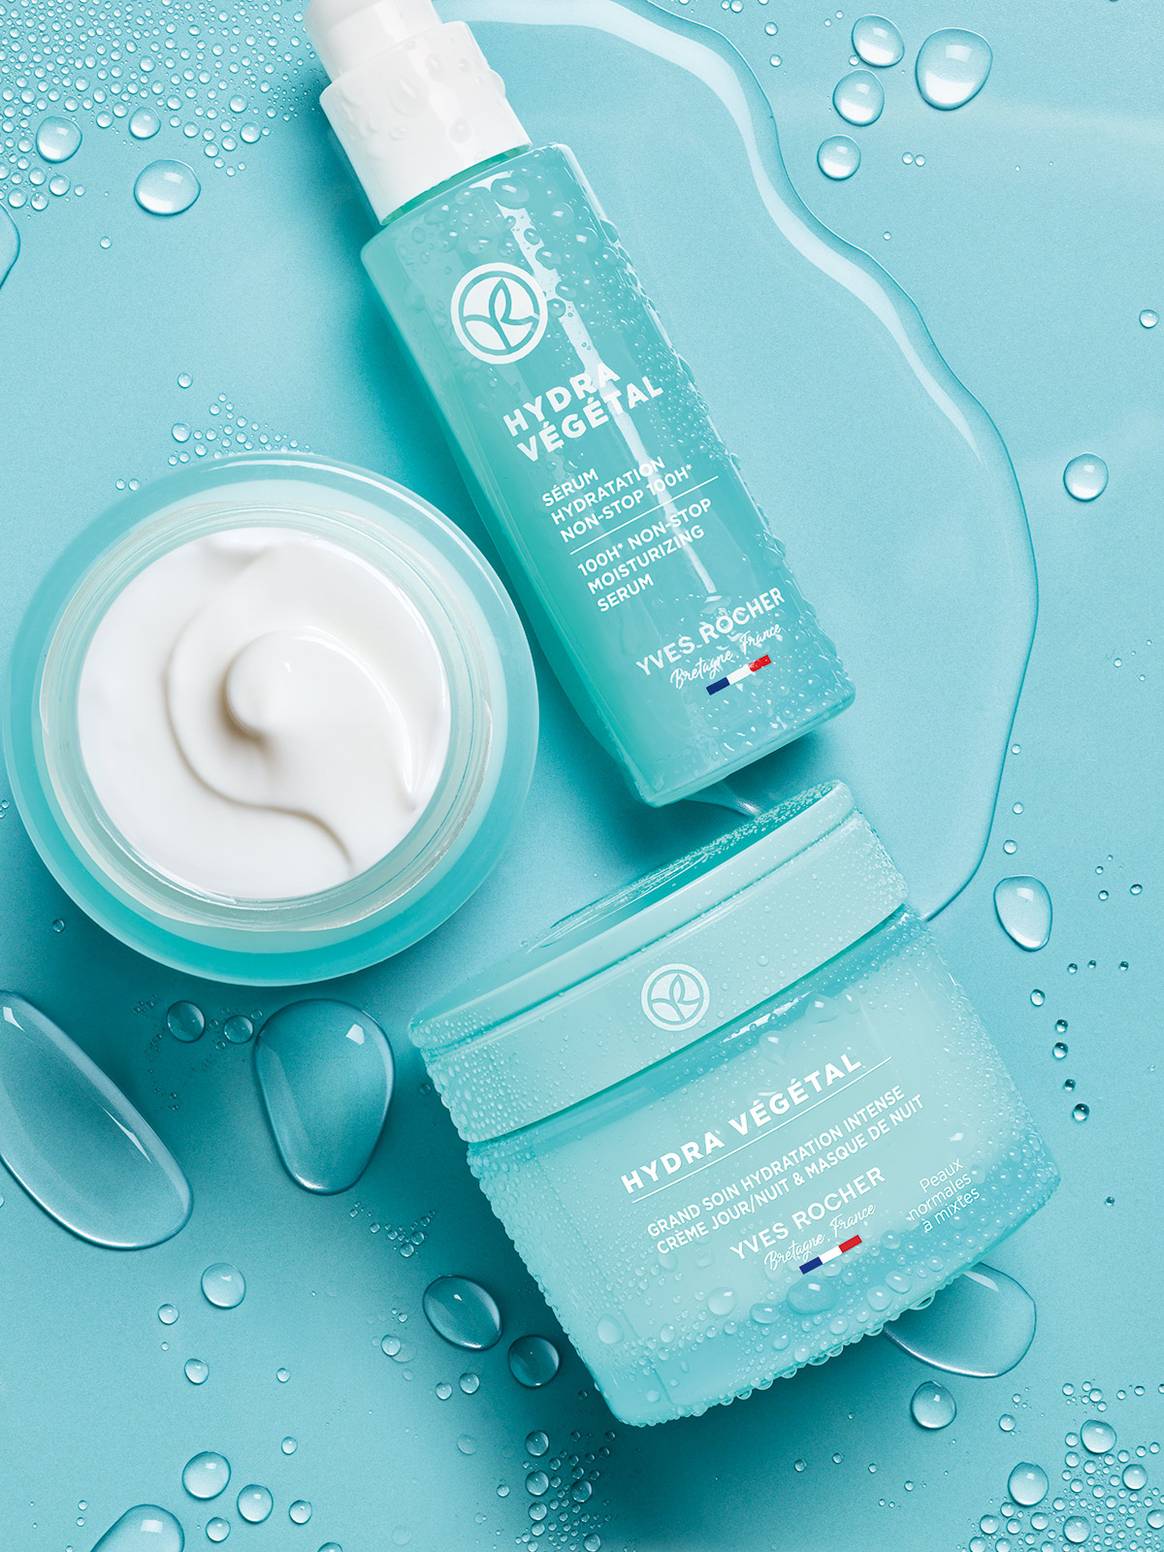 Yves Rocher unveils new brand strategy to reconnect with its roots